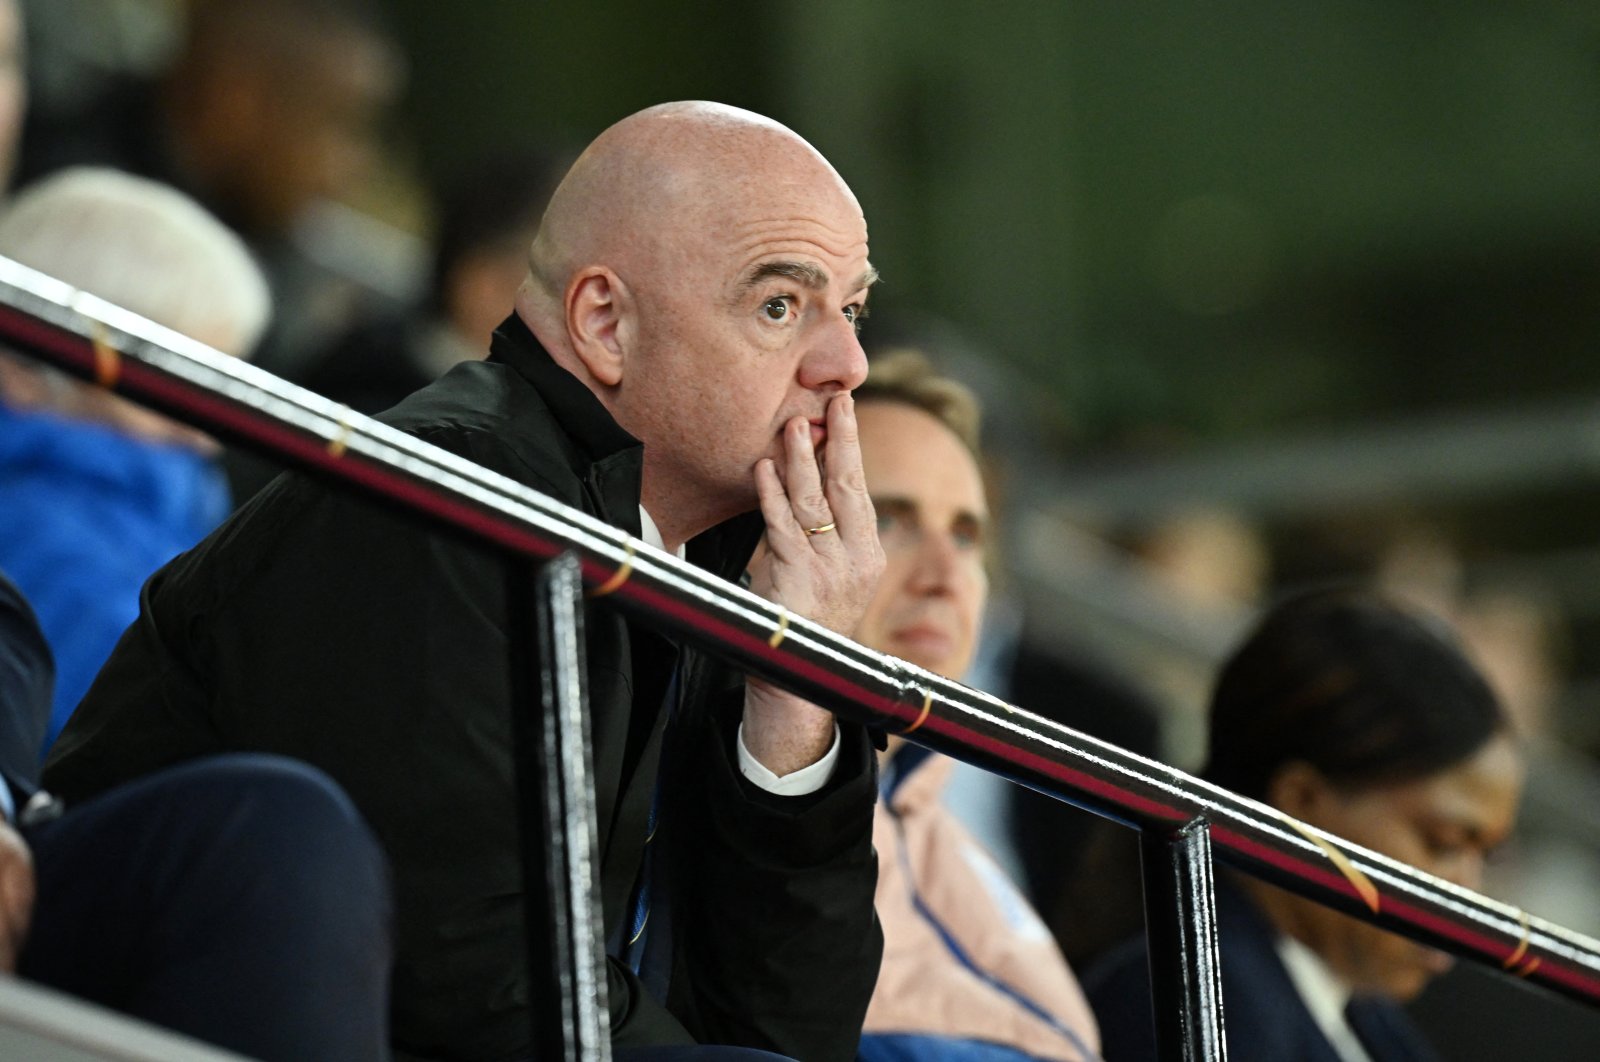 FIFA President Gianni Infantino is pictured in the stands during the Women’s World Cup quarterfinal match between England and Colombia at the Stadium Australia, Sydney, Australia, Aug. 12, 2023. (Reuters Photo)